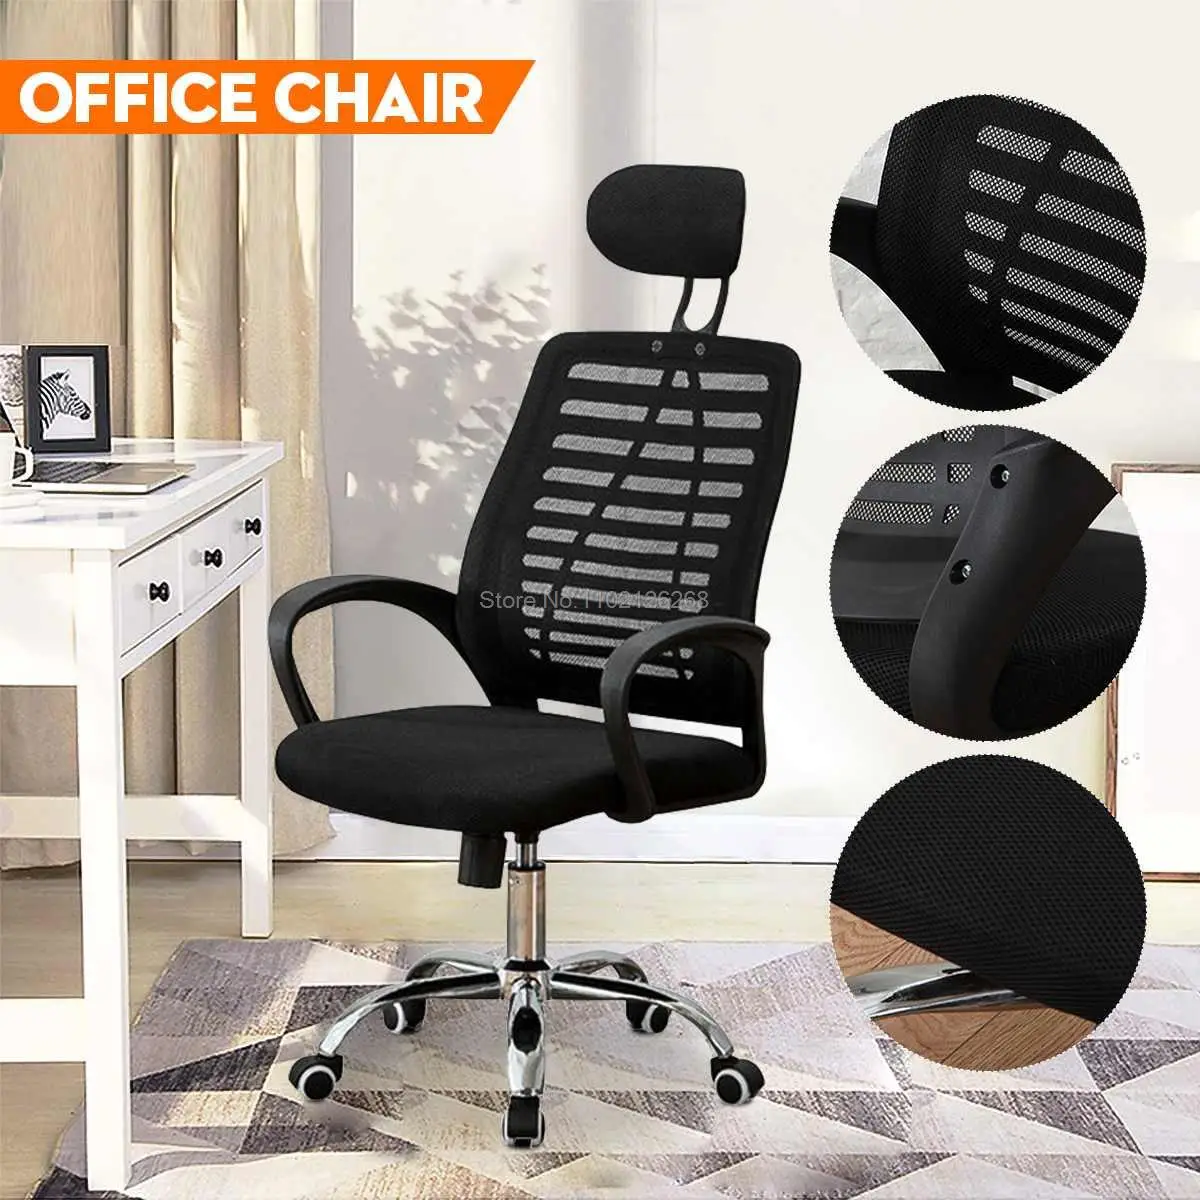 Quality Office Chair Black Swivel Mesh Computer Ergonomic Chair Gaming Chair High Back With Adjustable Armrest Head Support studio photo 360 degree swivel head reflector holder arm